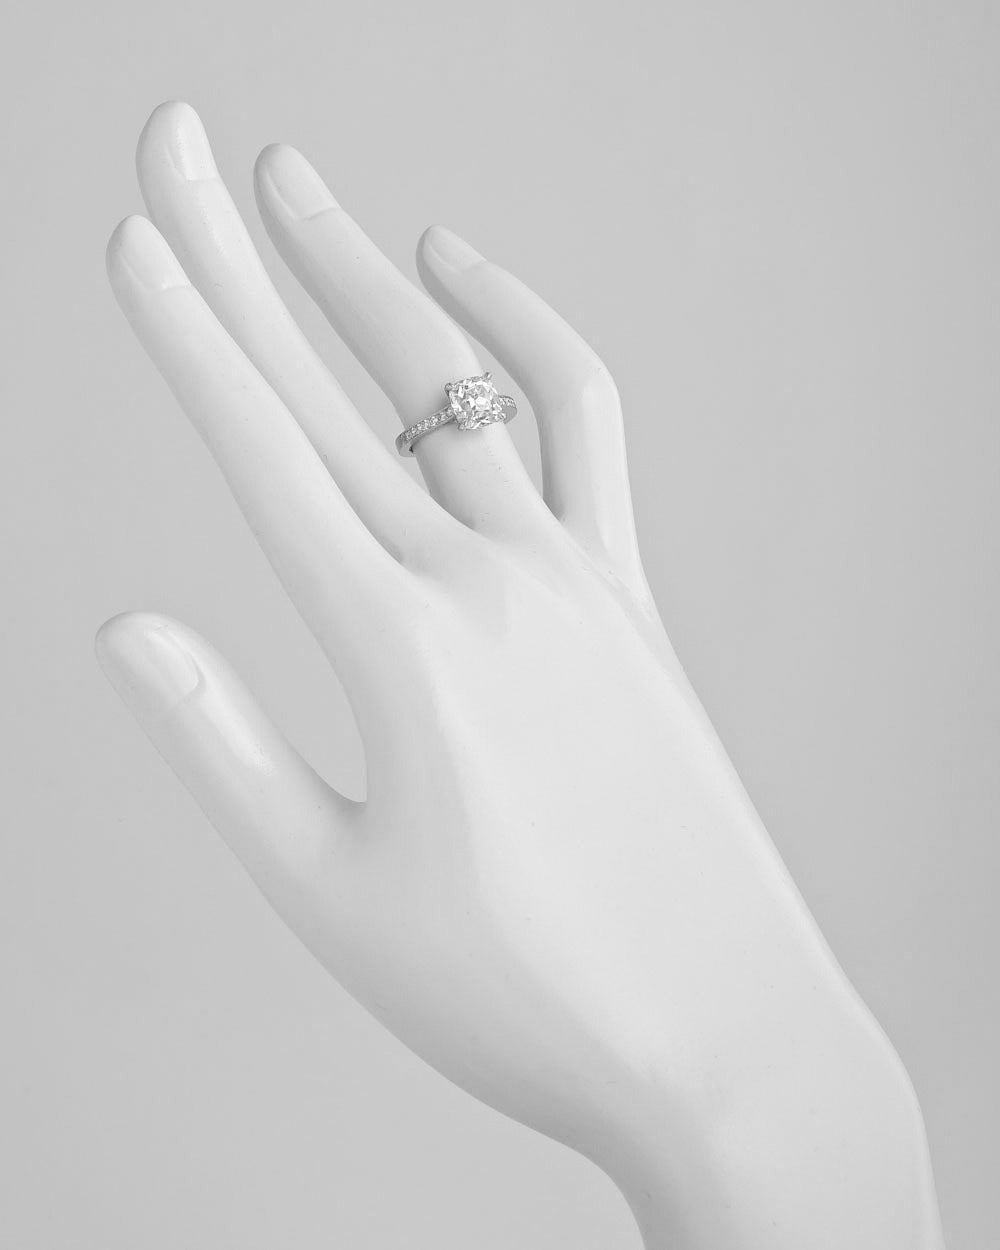 Diamond engagement ring, centering on a near-colorless cushion brilliant-cut diamond weighing 2.01 carats, with seven bead-set round diamonds at either shoulder and a bead-set diamond profile, mounted in platinum. Accompanied by the GIA certificate